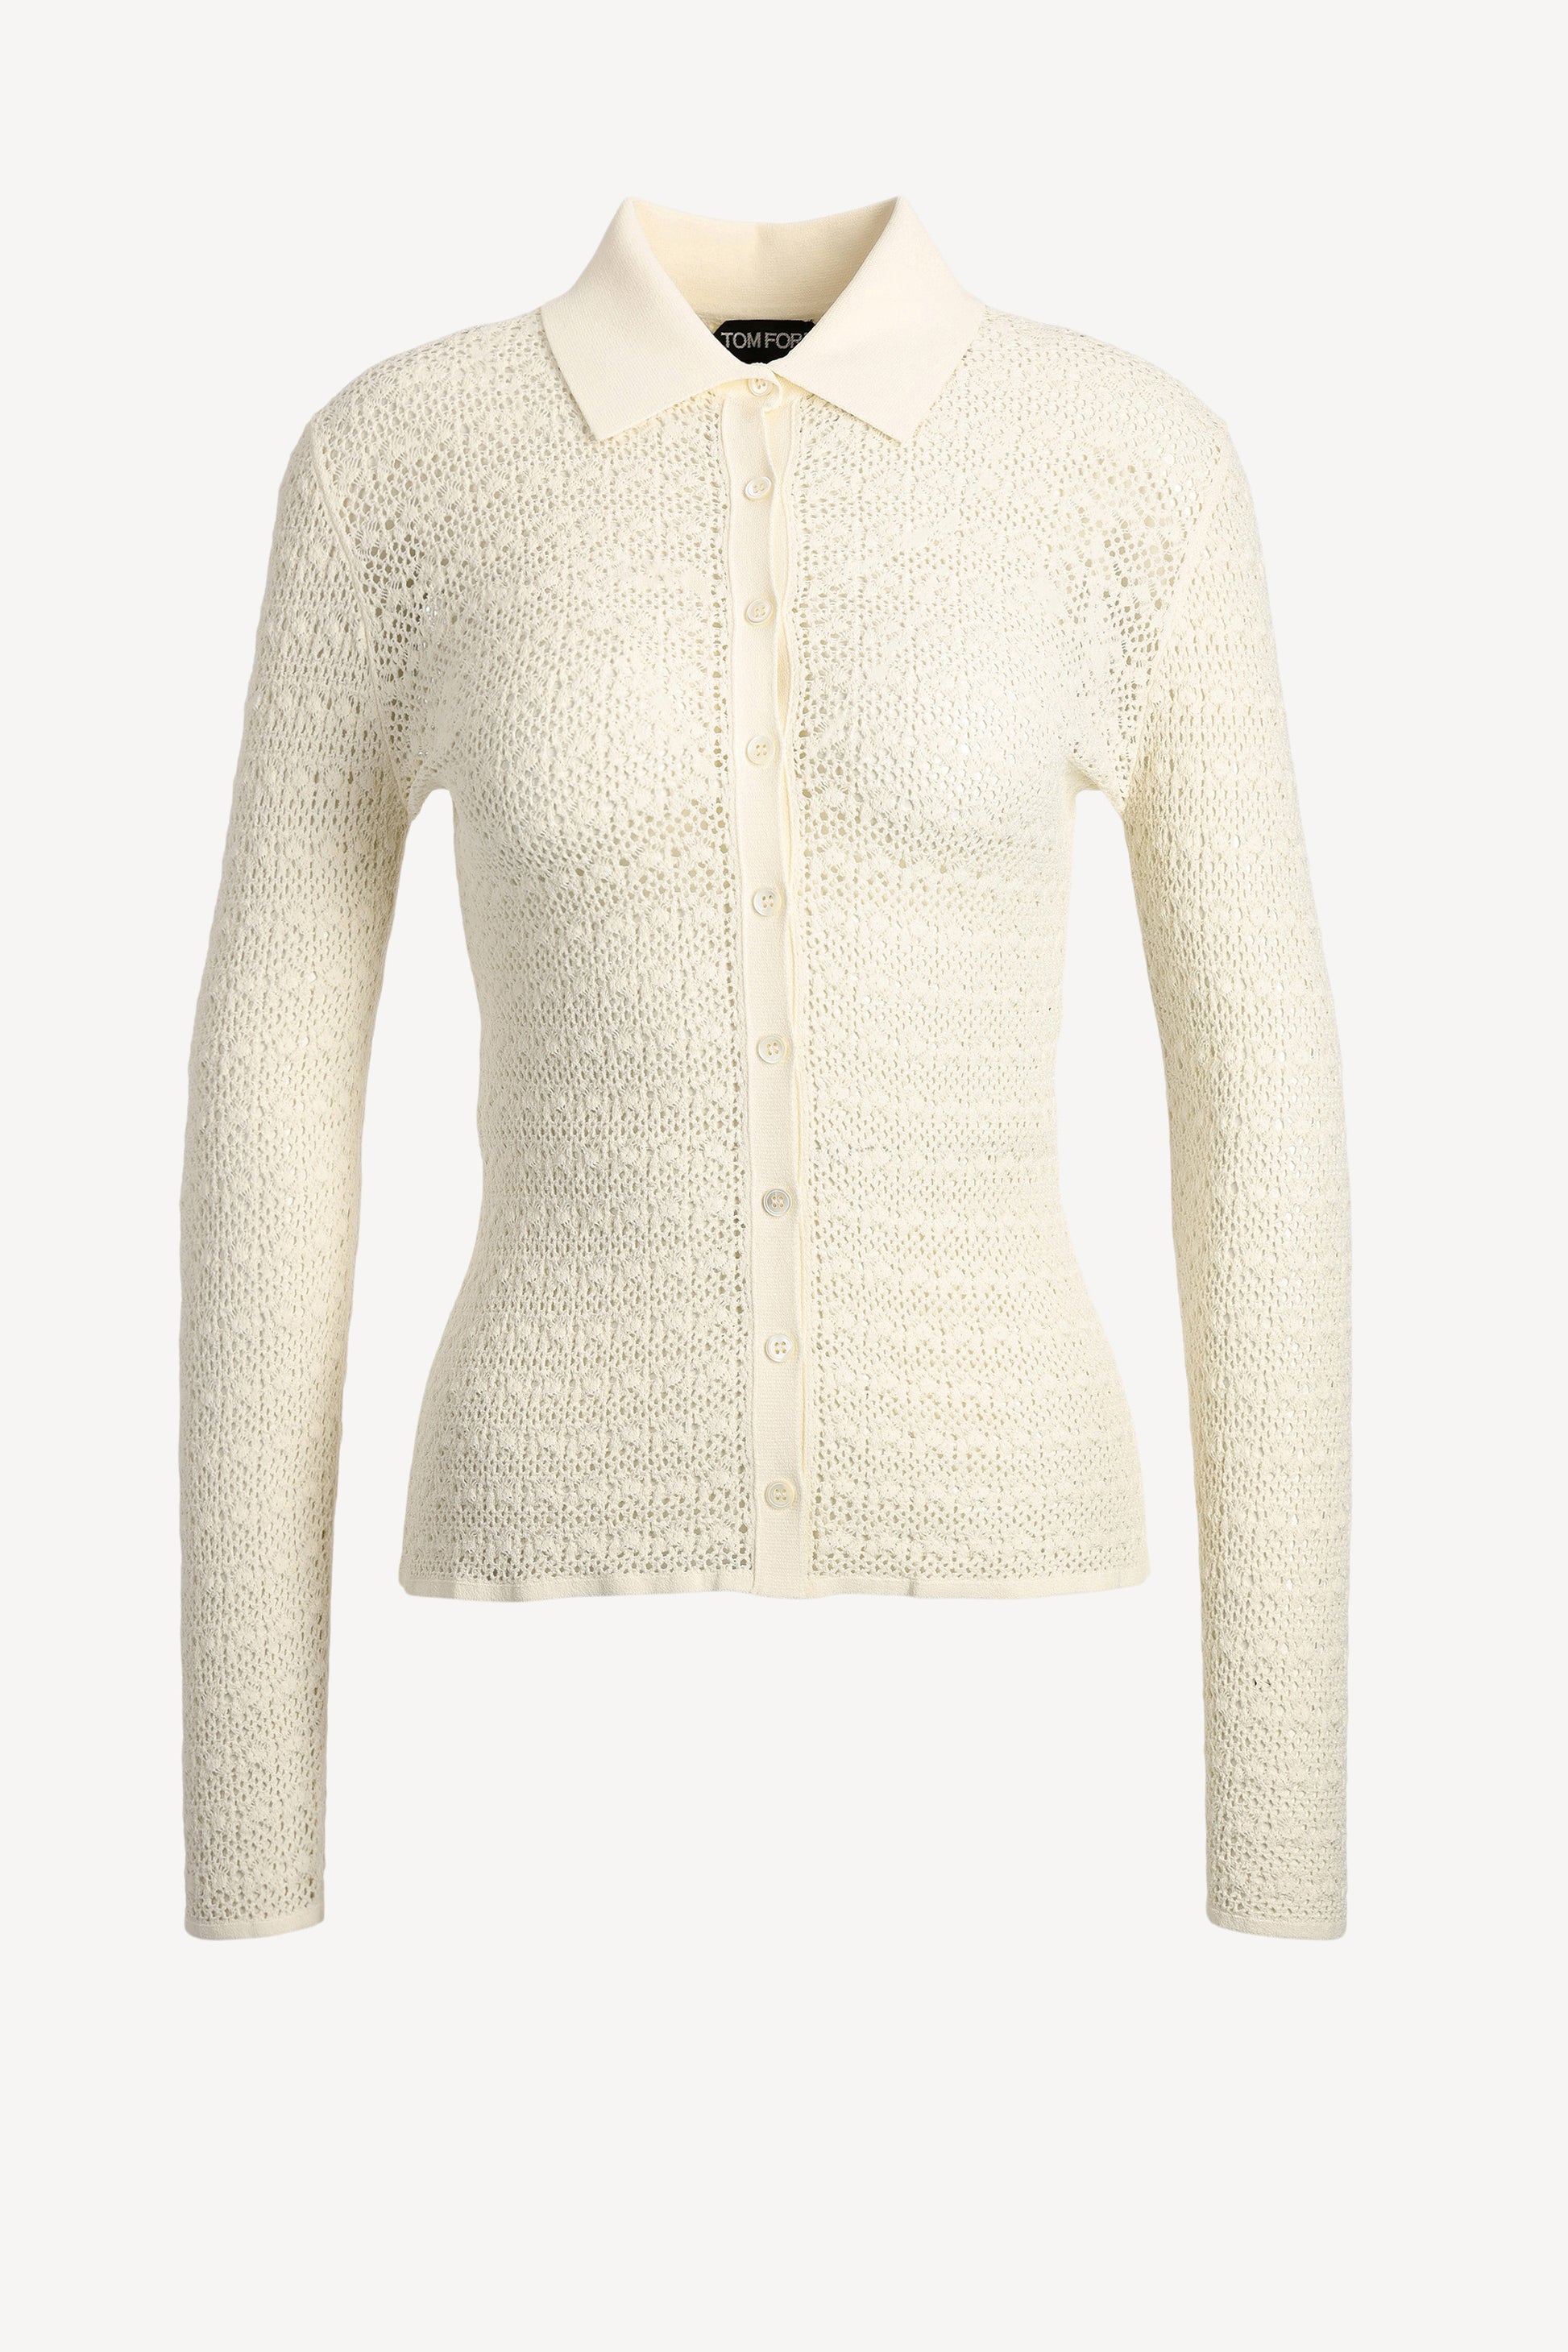 Stricktop in Off-WhiteTom Ford - Anita Hass